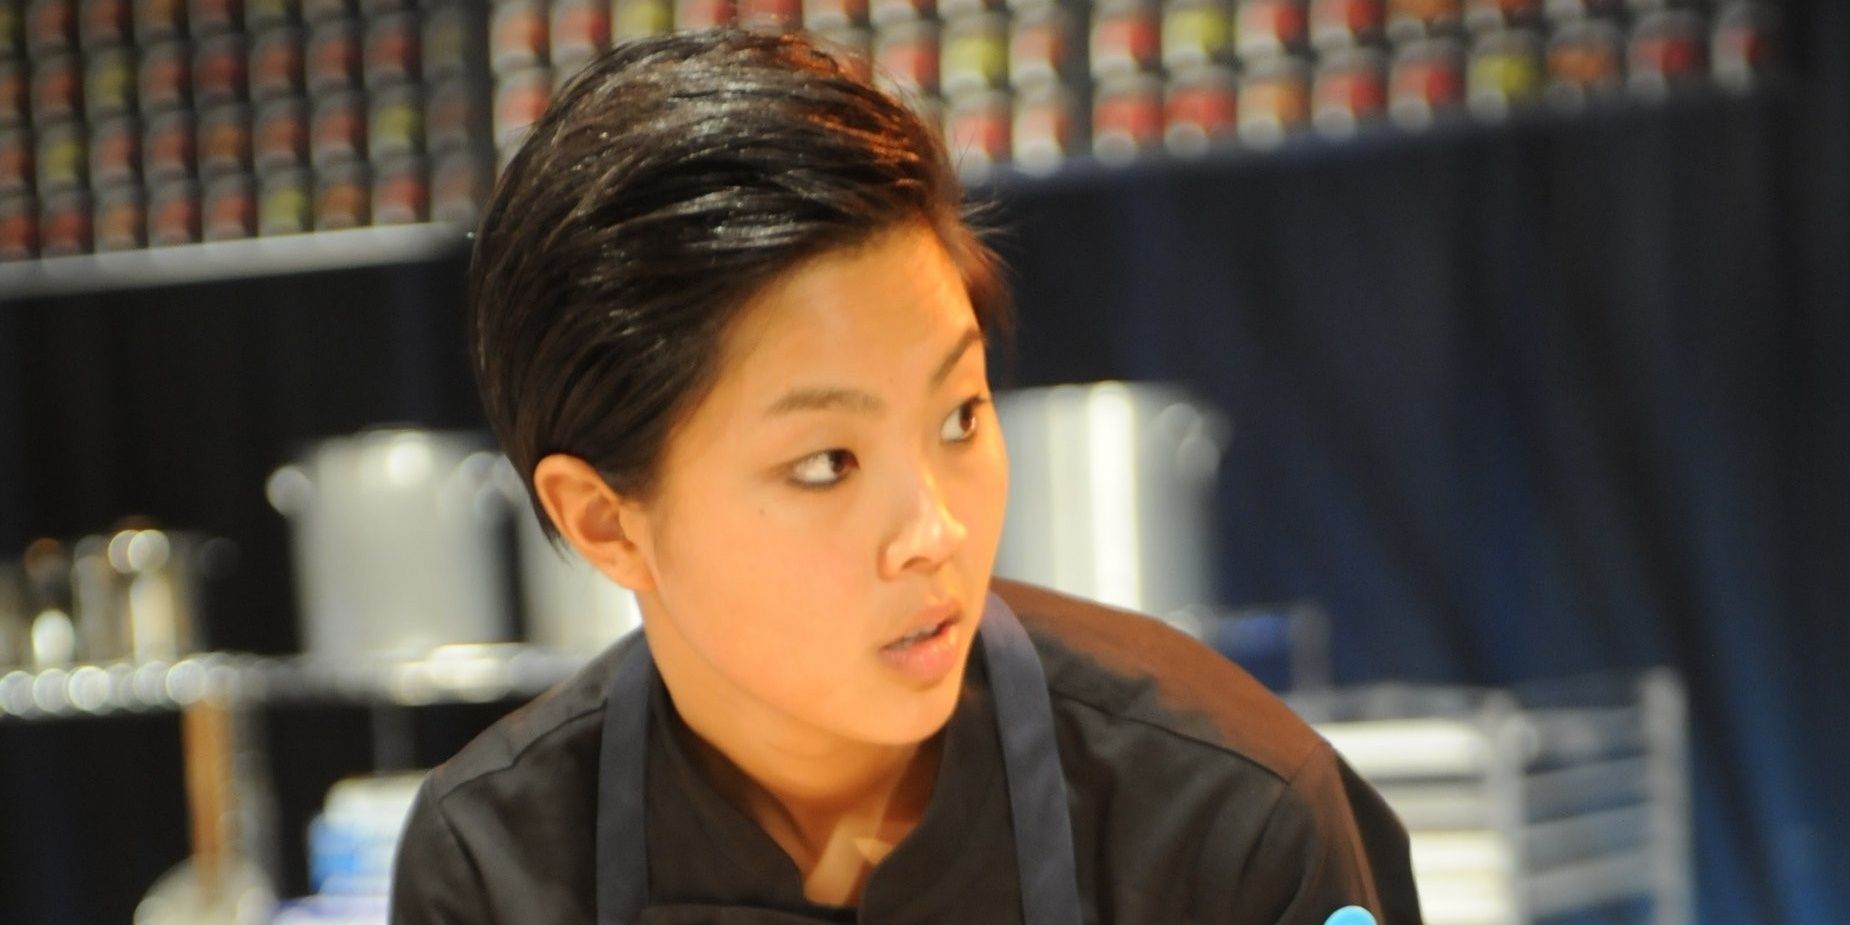 Kristen Kish looks to the side